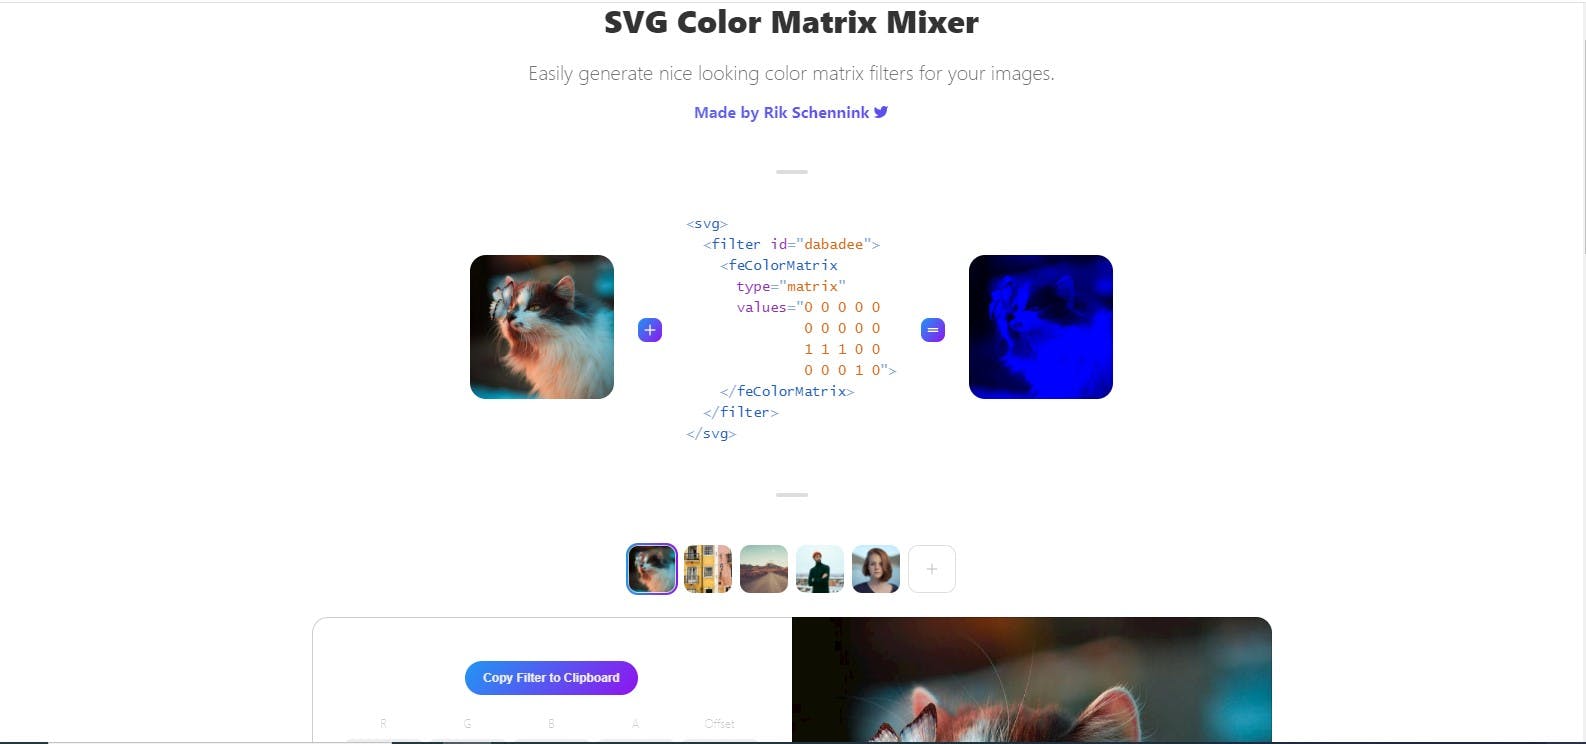 Delve into the world of SVG customization with the SVG Color Matrix Mixer